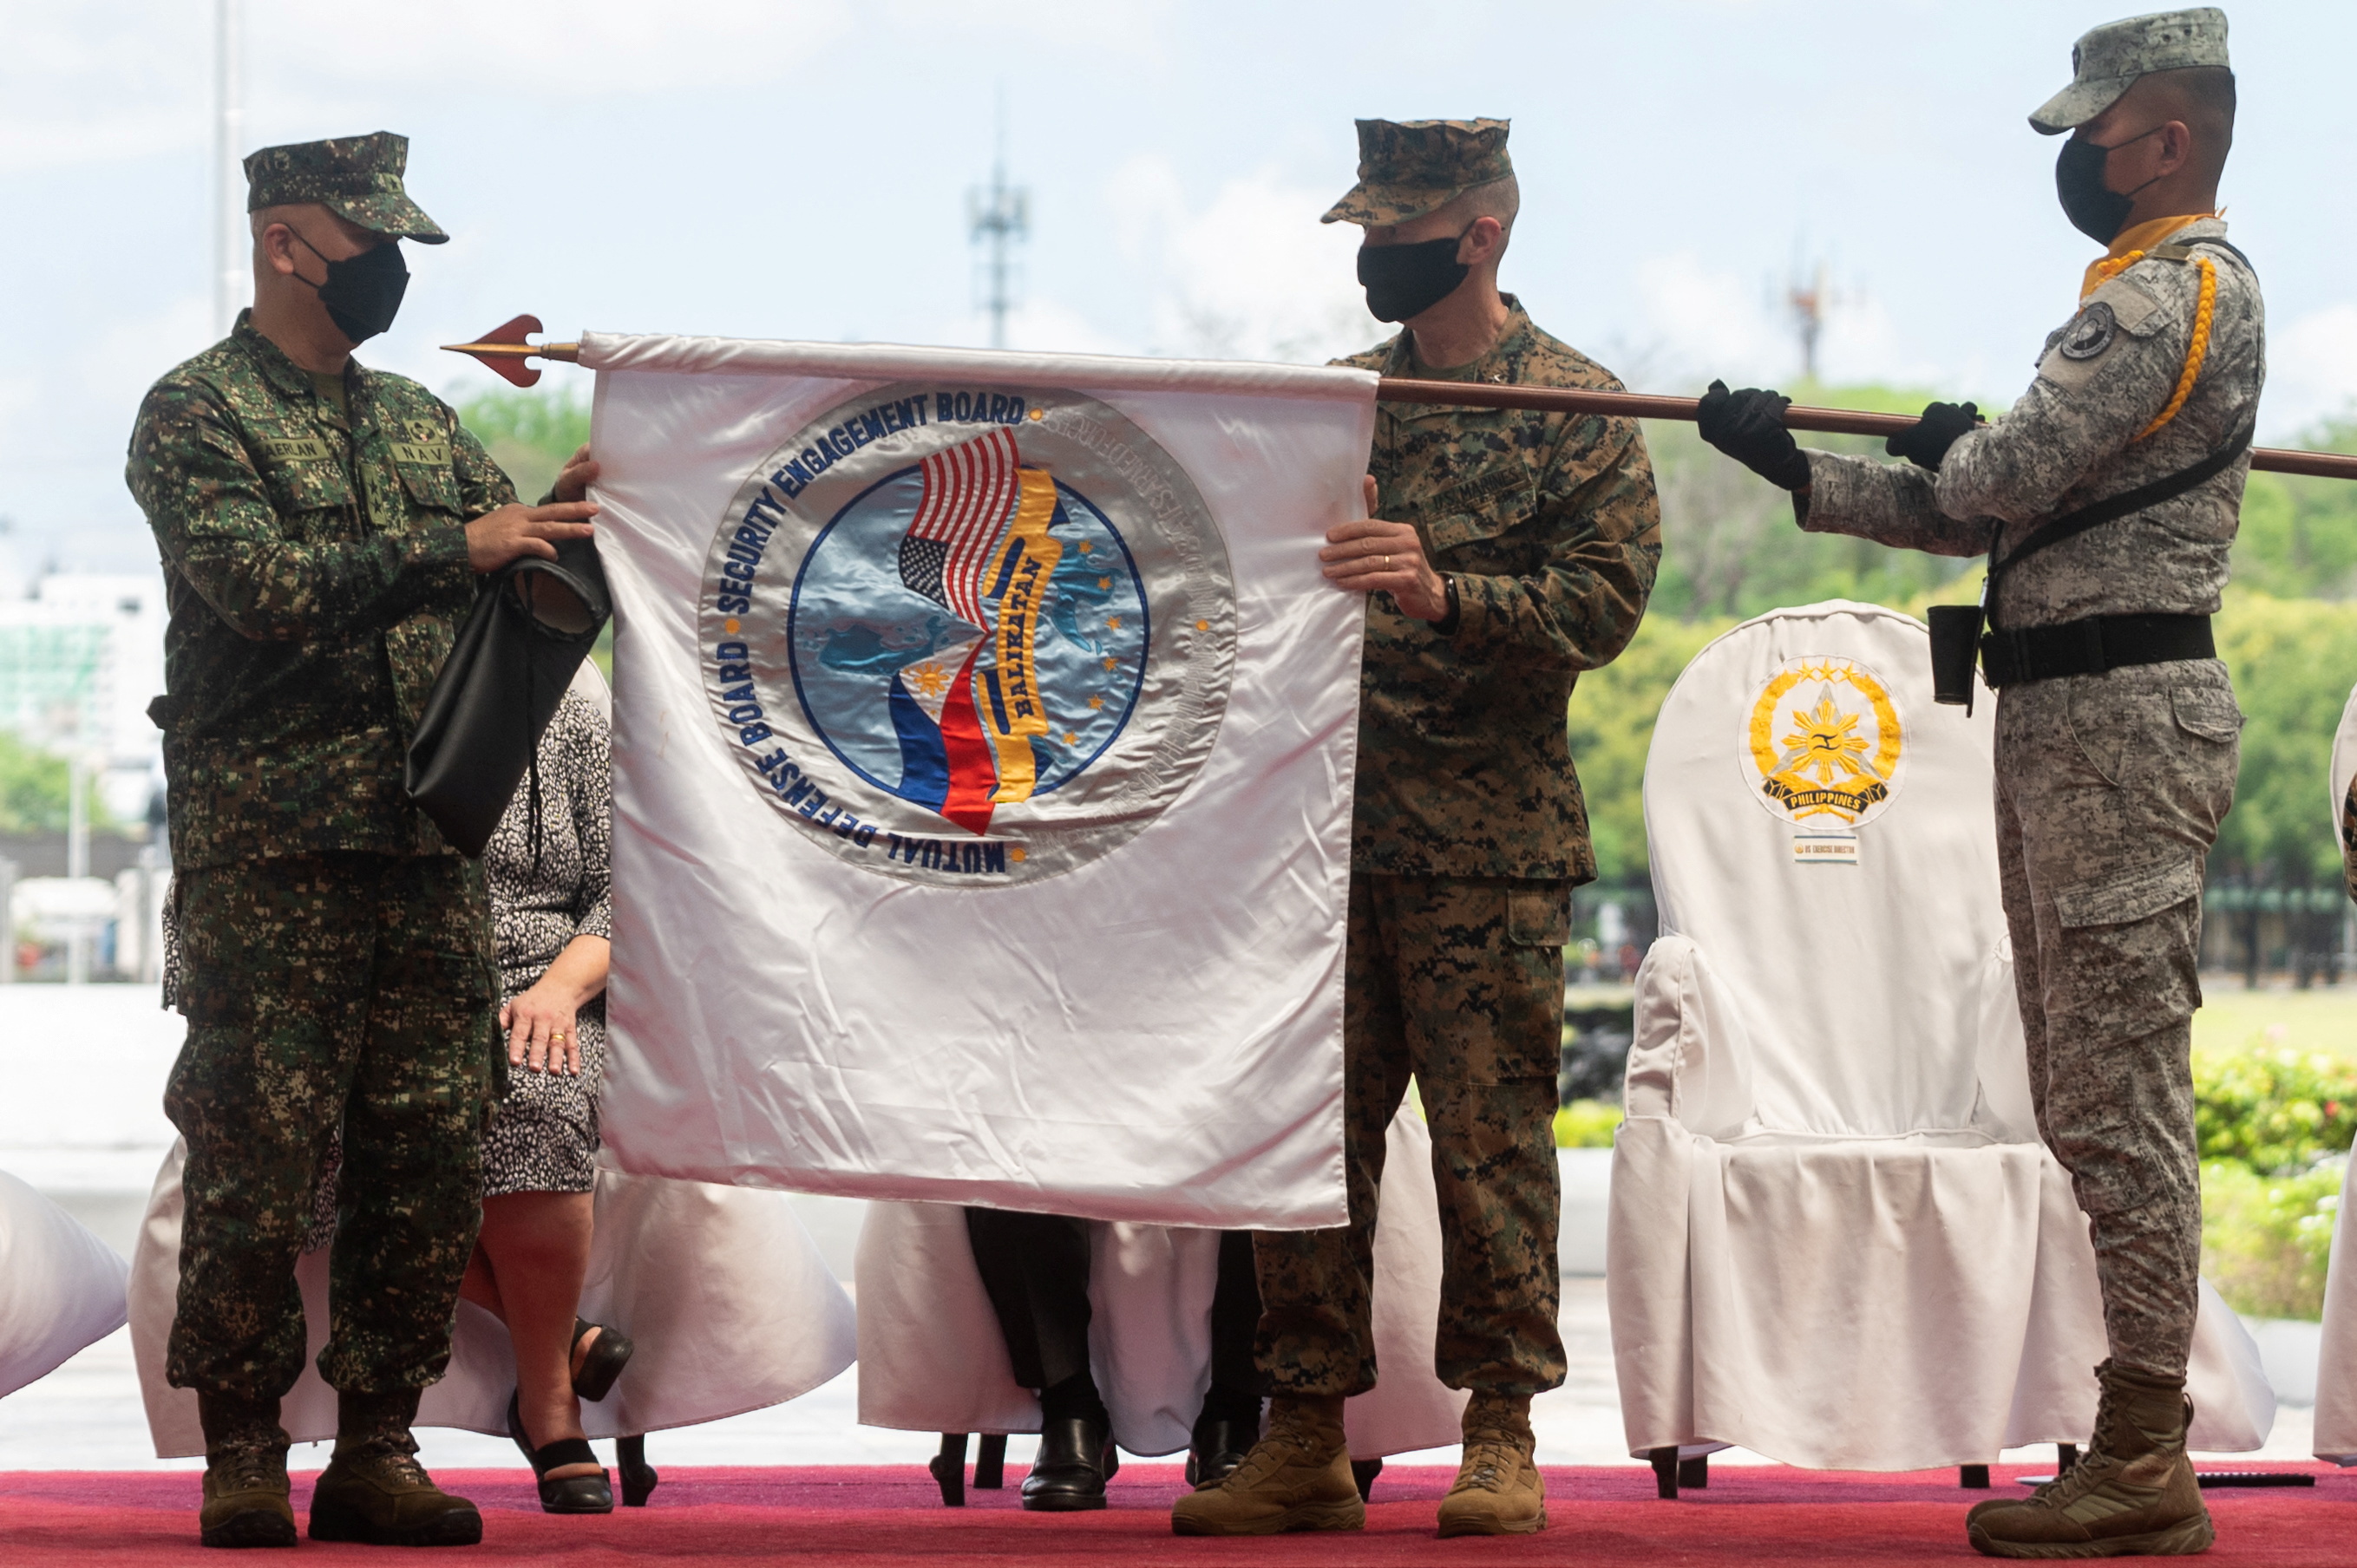 Opening ceremony of Balikatan joint military exercises